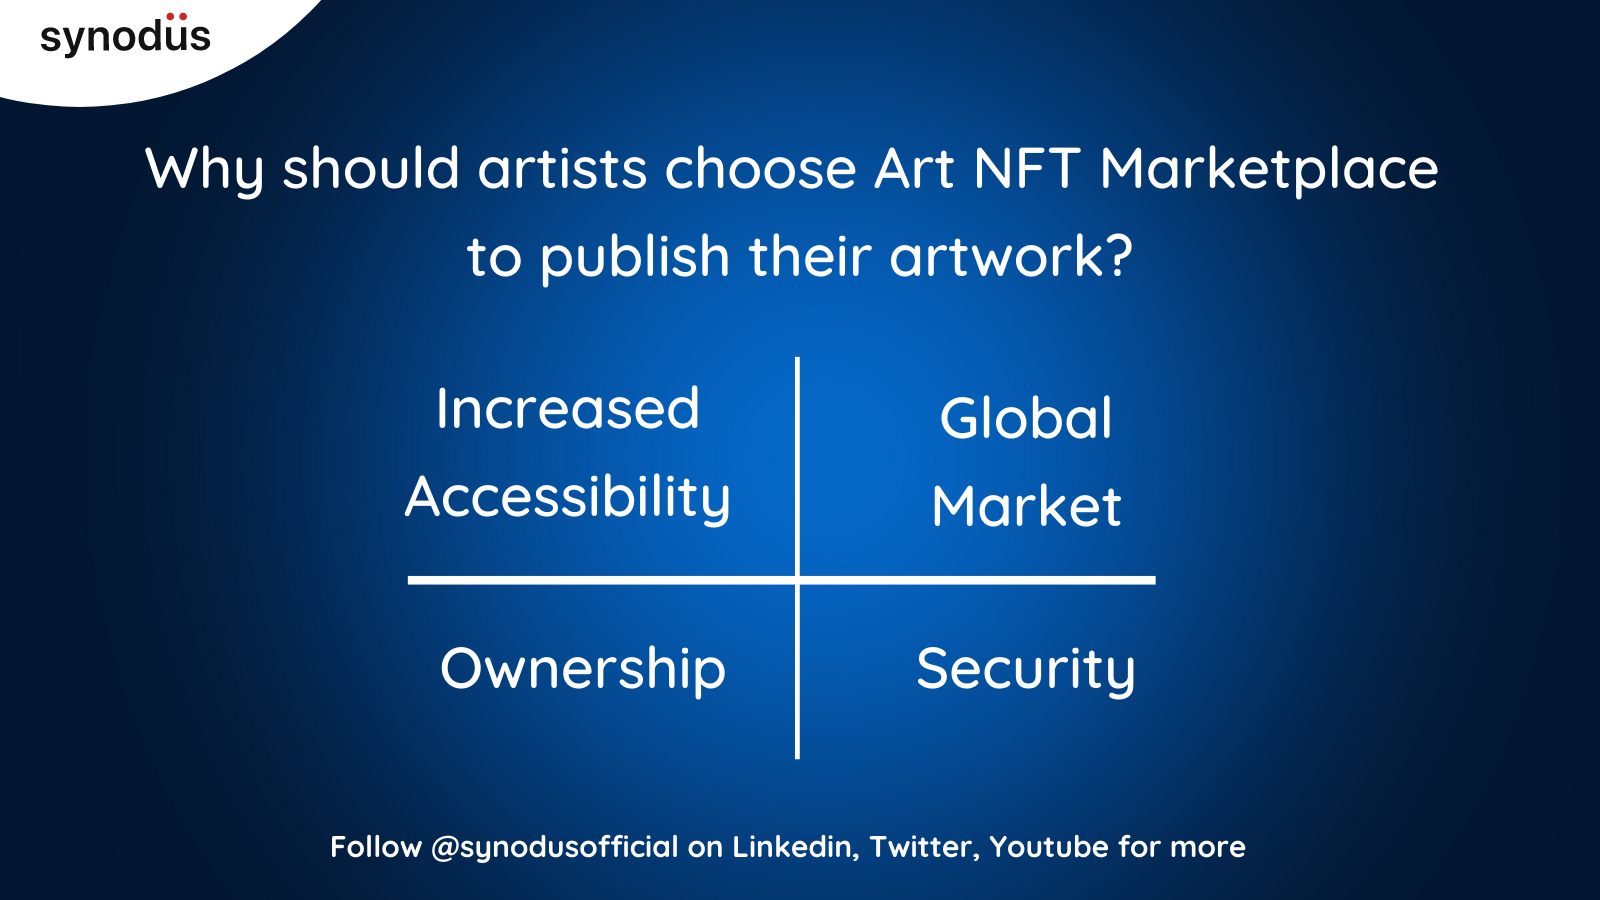 Why should artists choose Art NFT Marketplace to publish their artwork?